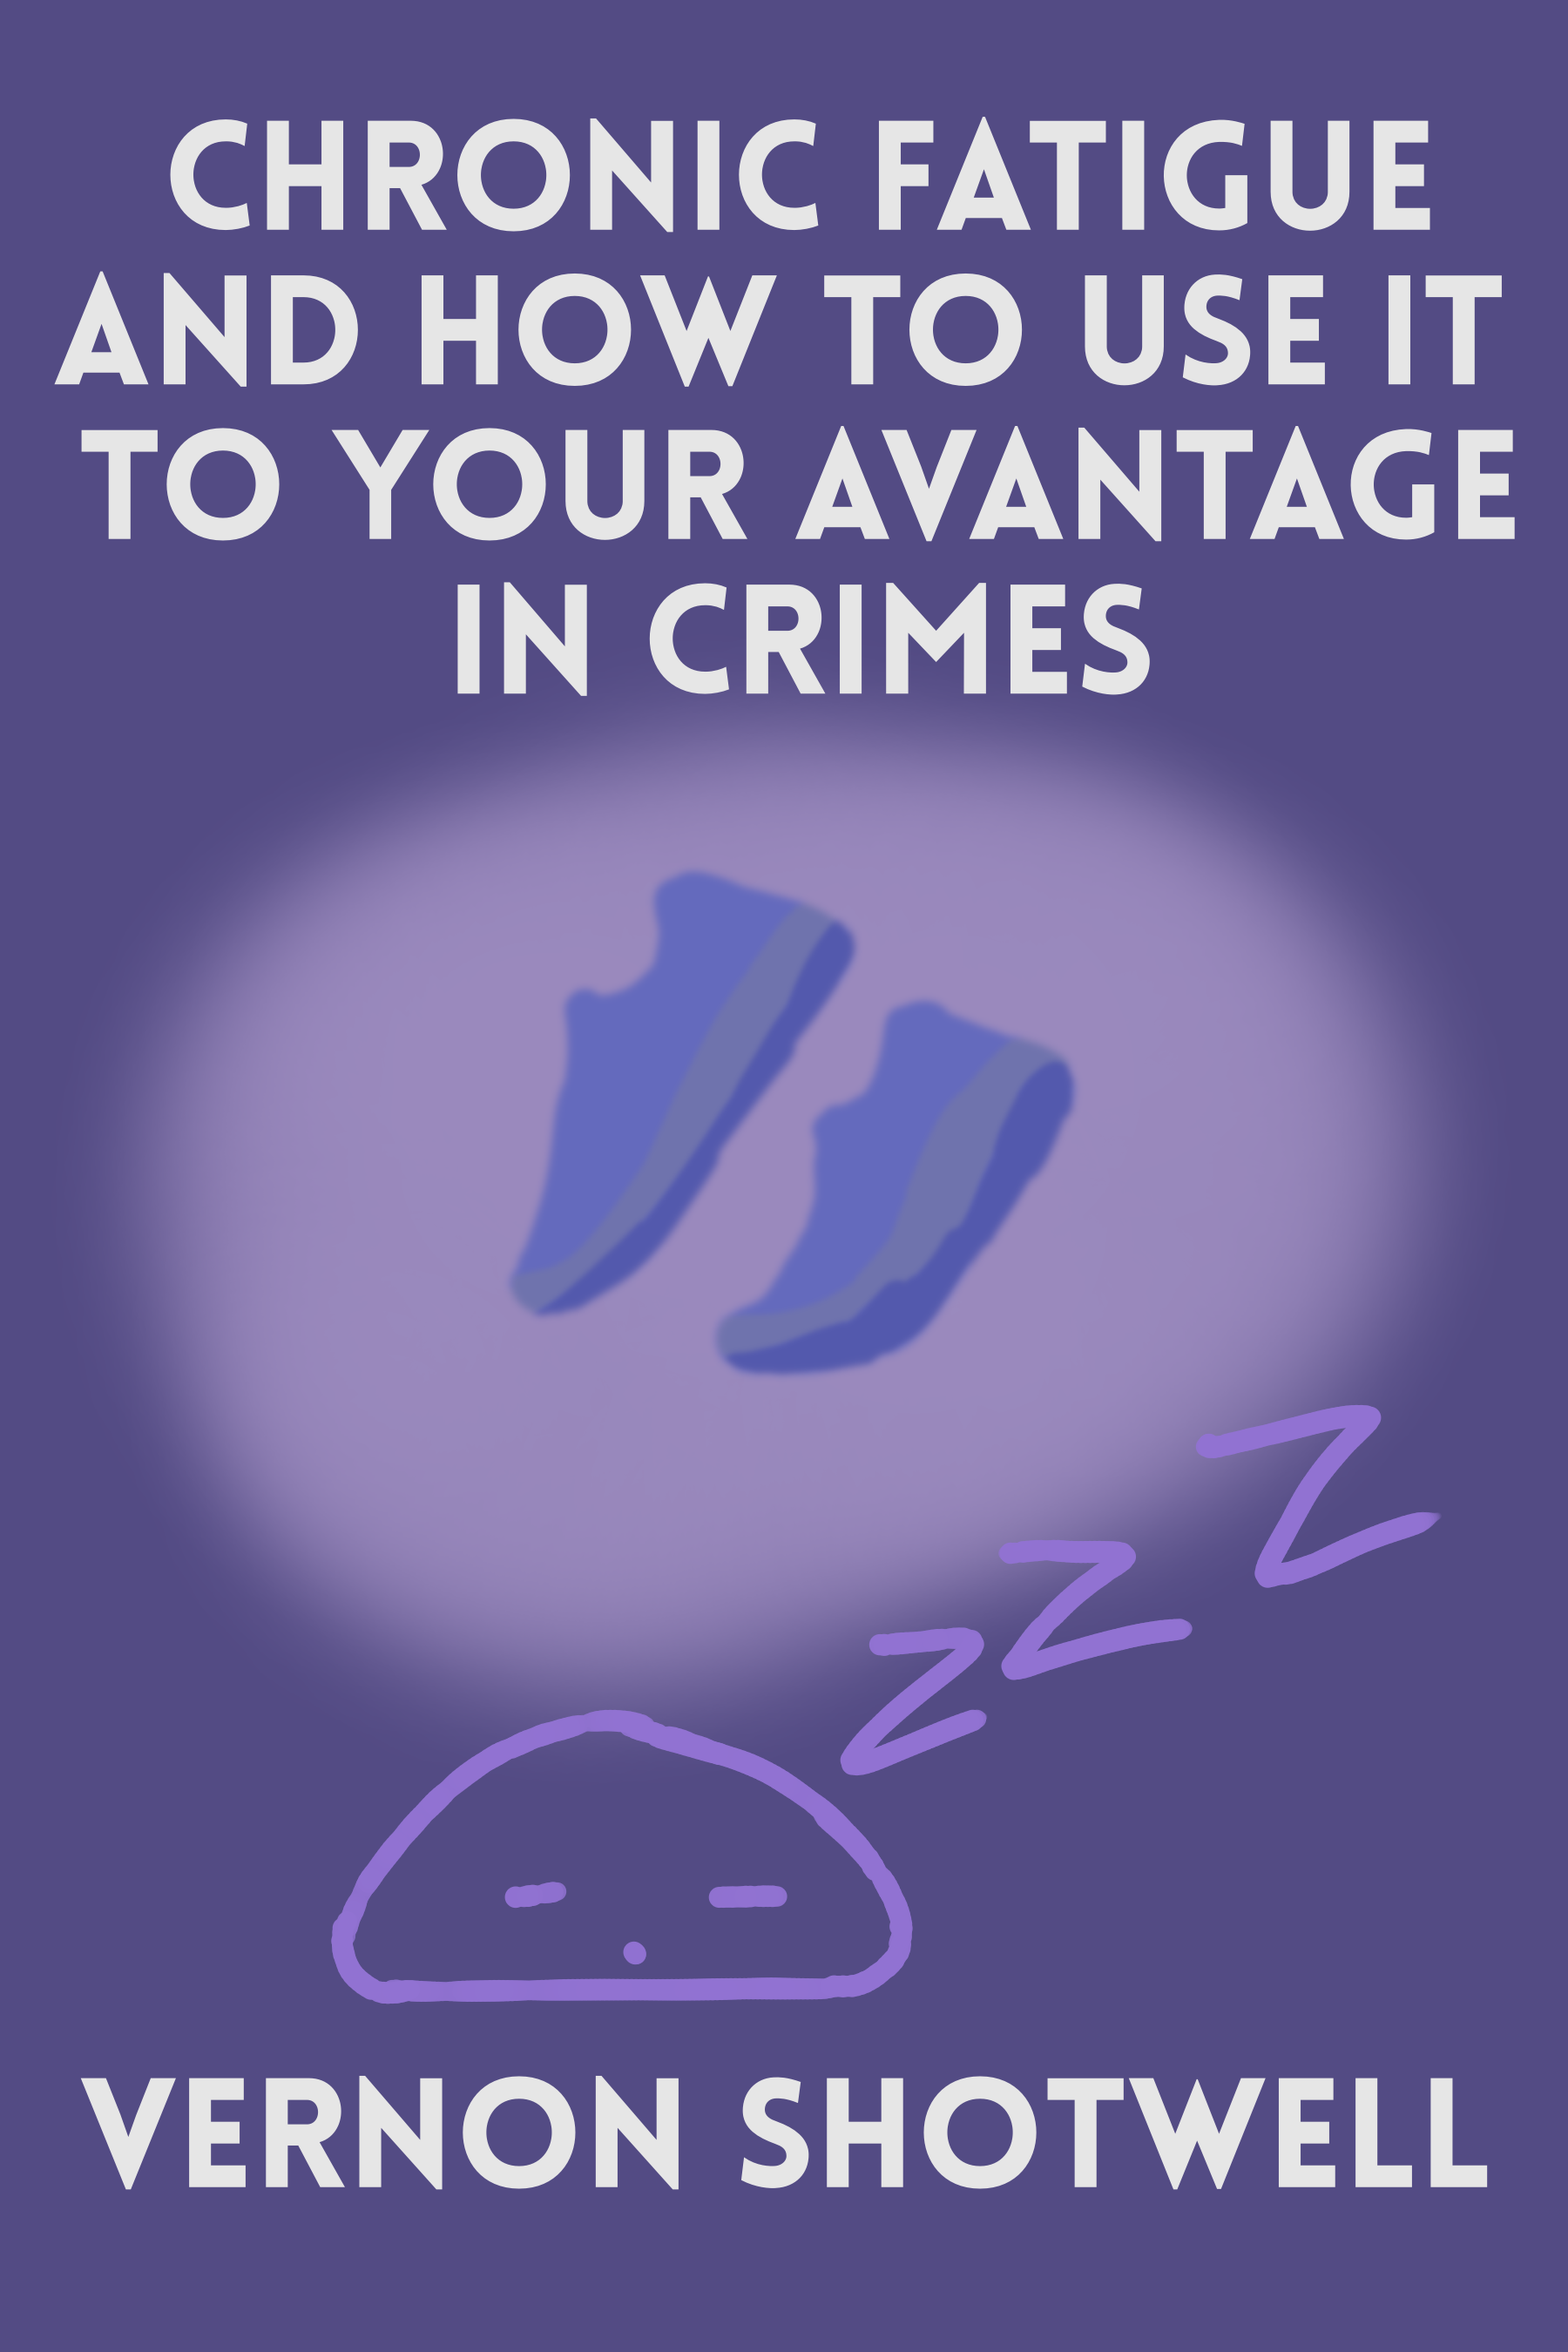 a fake book cover, chronic fatigue and how to use it to your advantage in crimes by vernon shotwell, the cover shows a blob sleeping and dreaming of a pair of shoesApr 13 2022